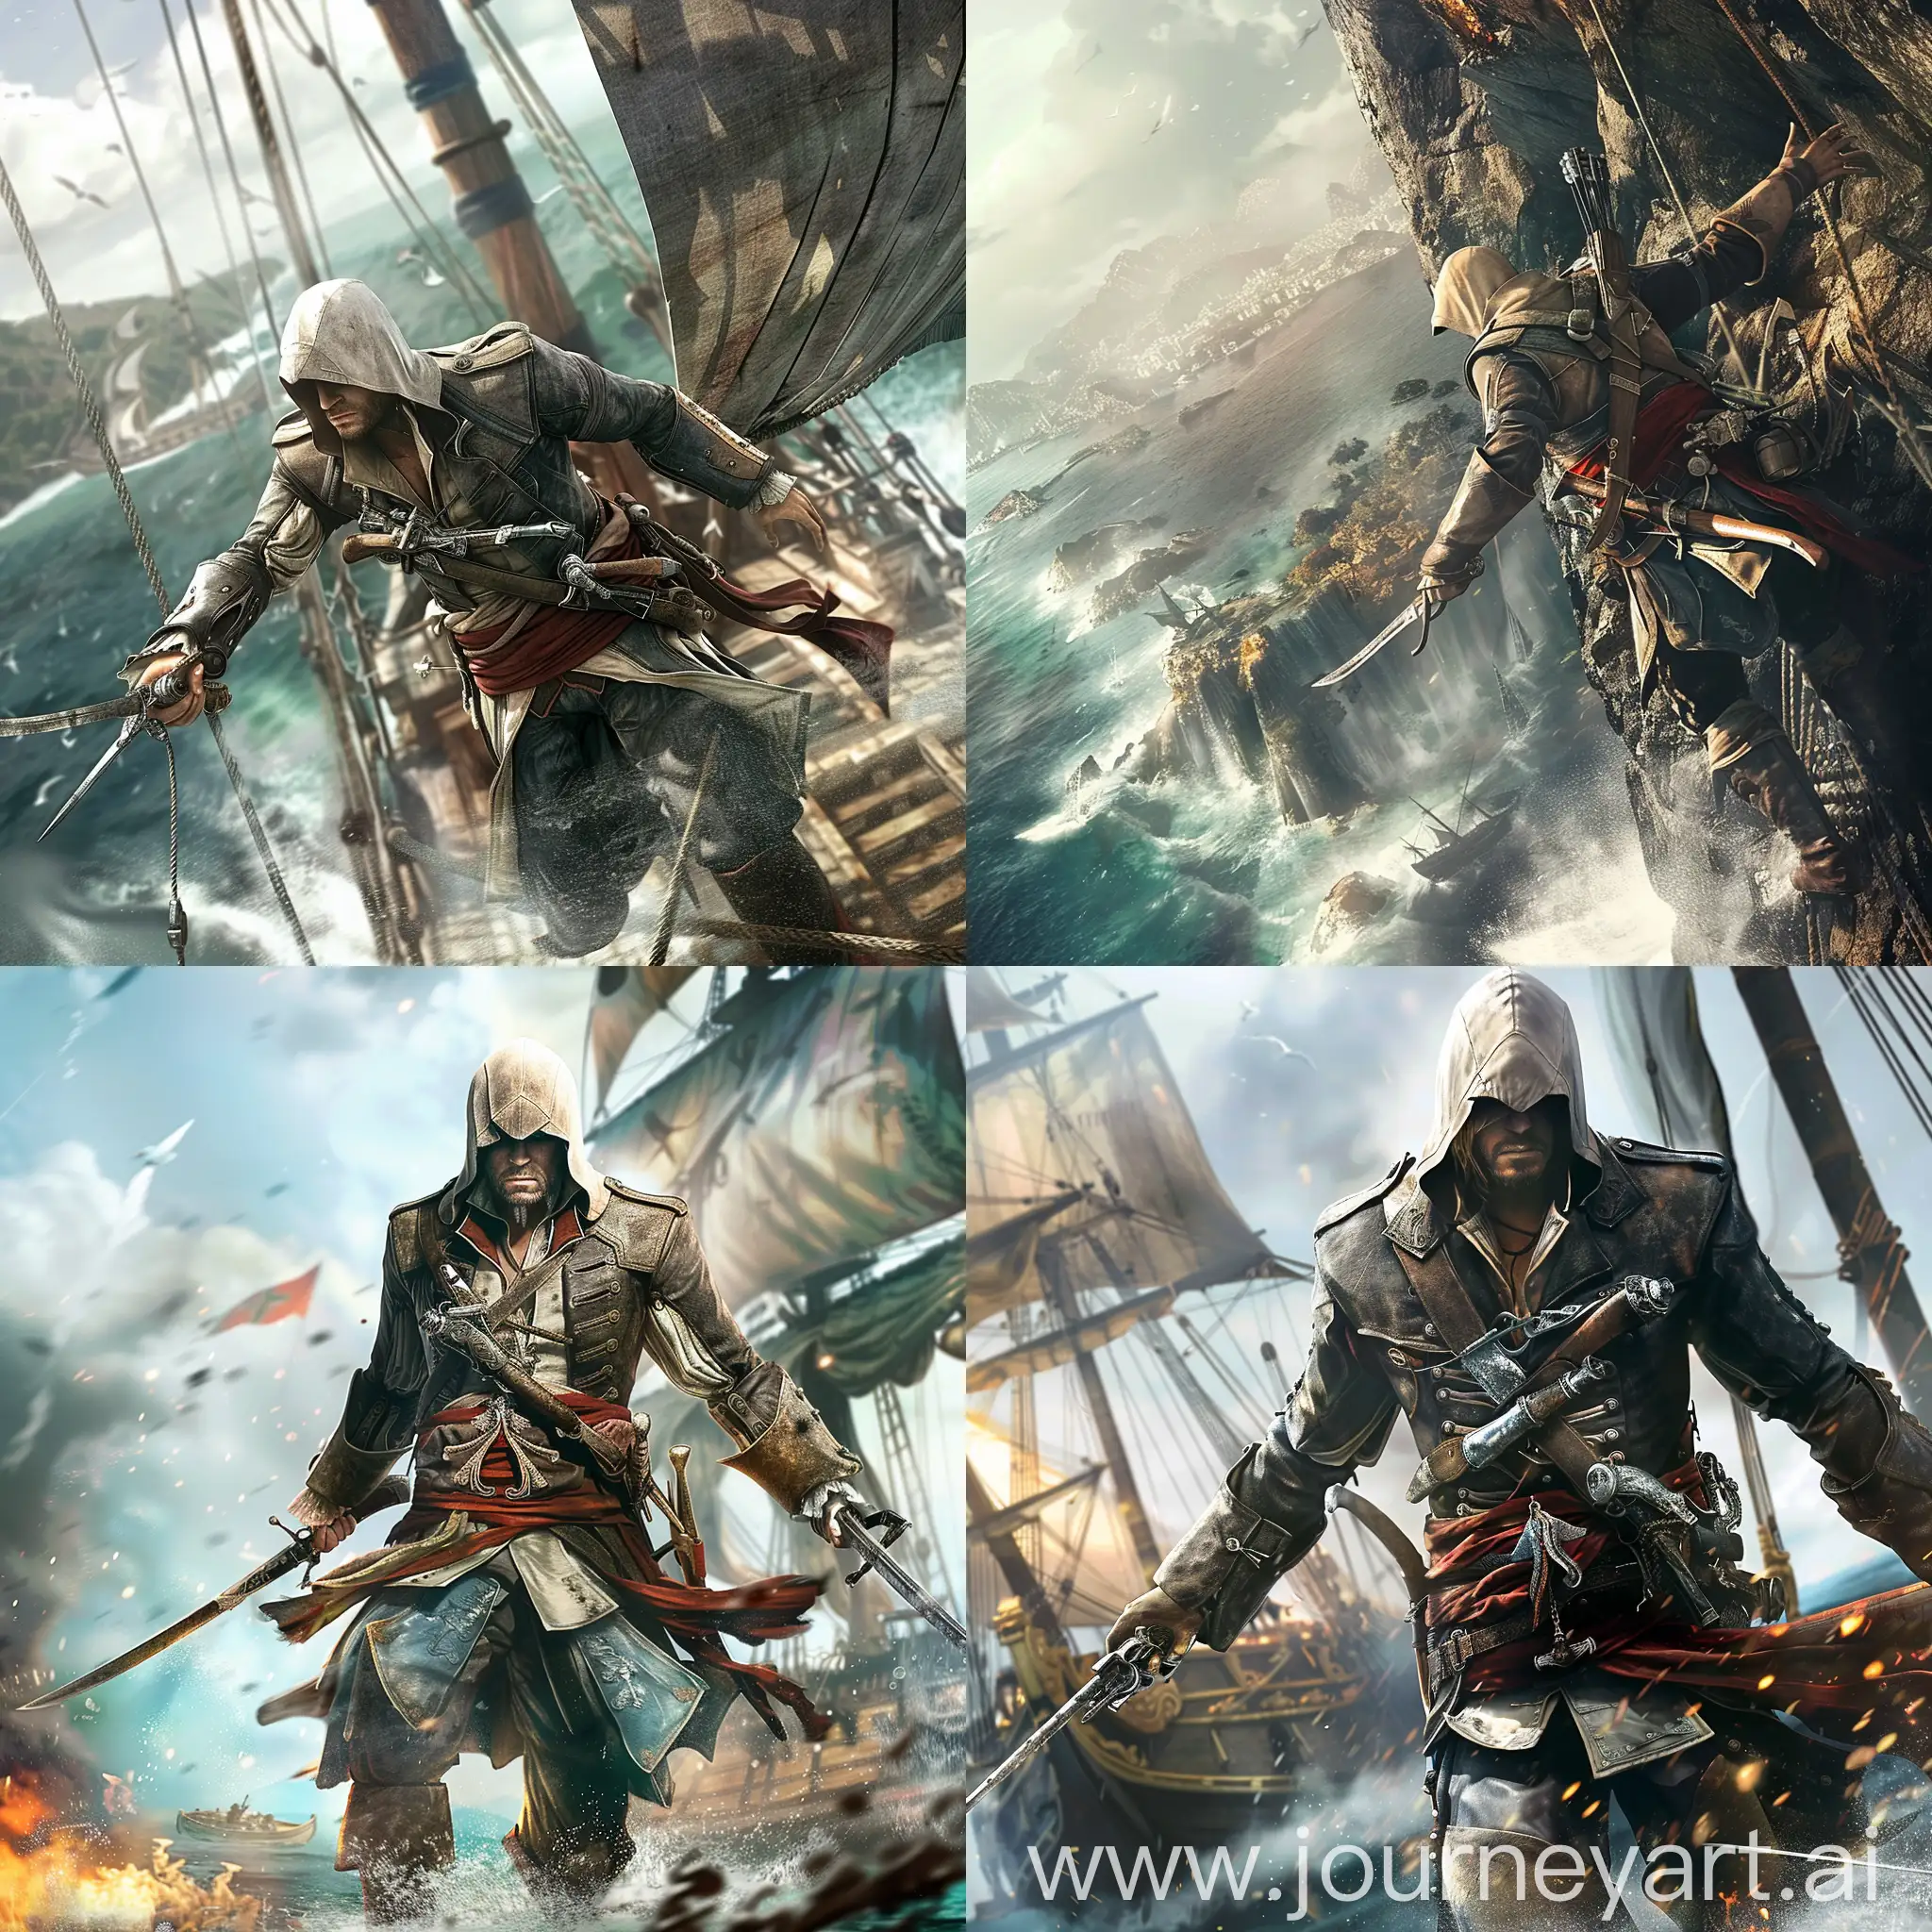 Pirates-Dueling-on-the-High-Seas-in-Assassins-Creed-Black-Flag